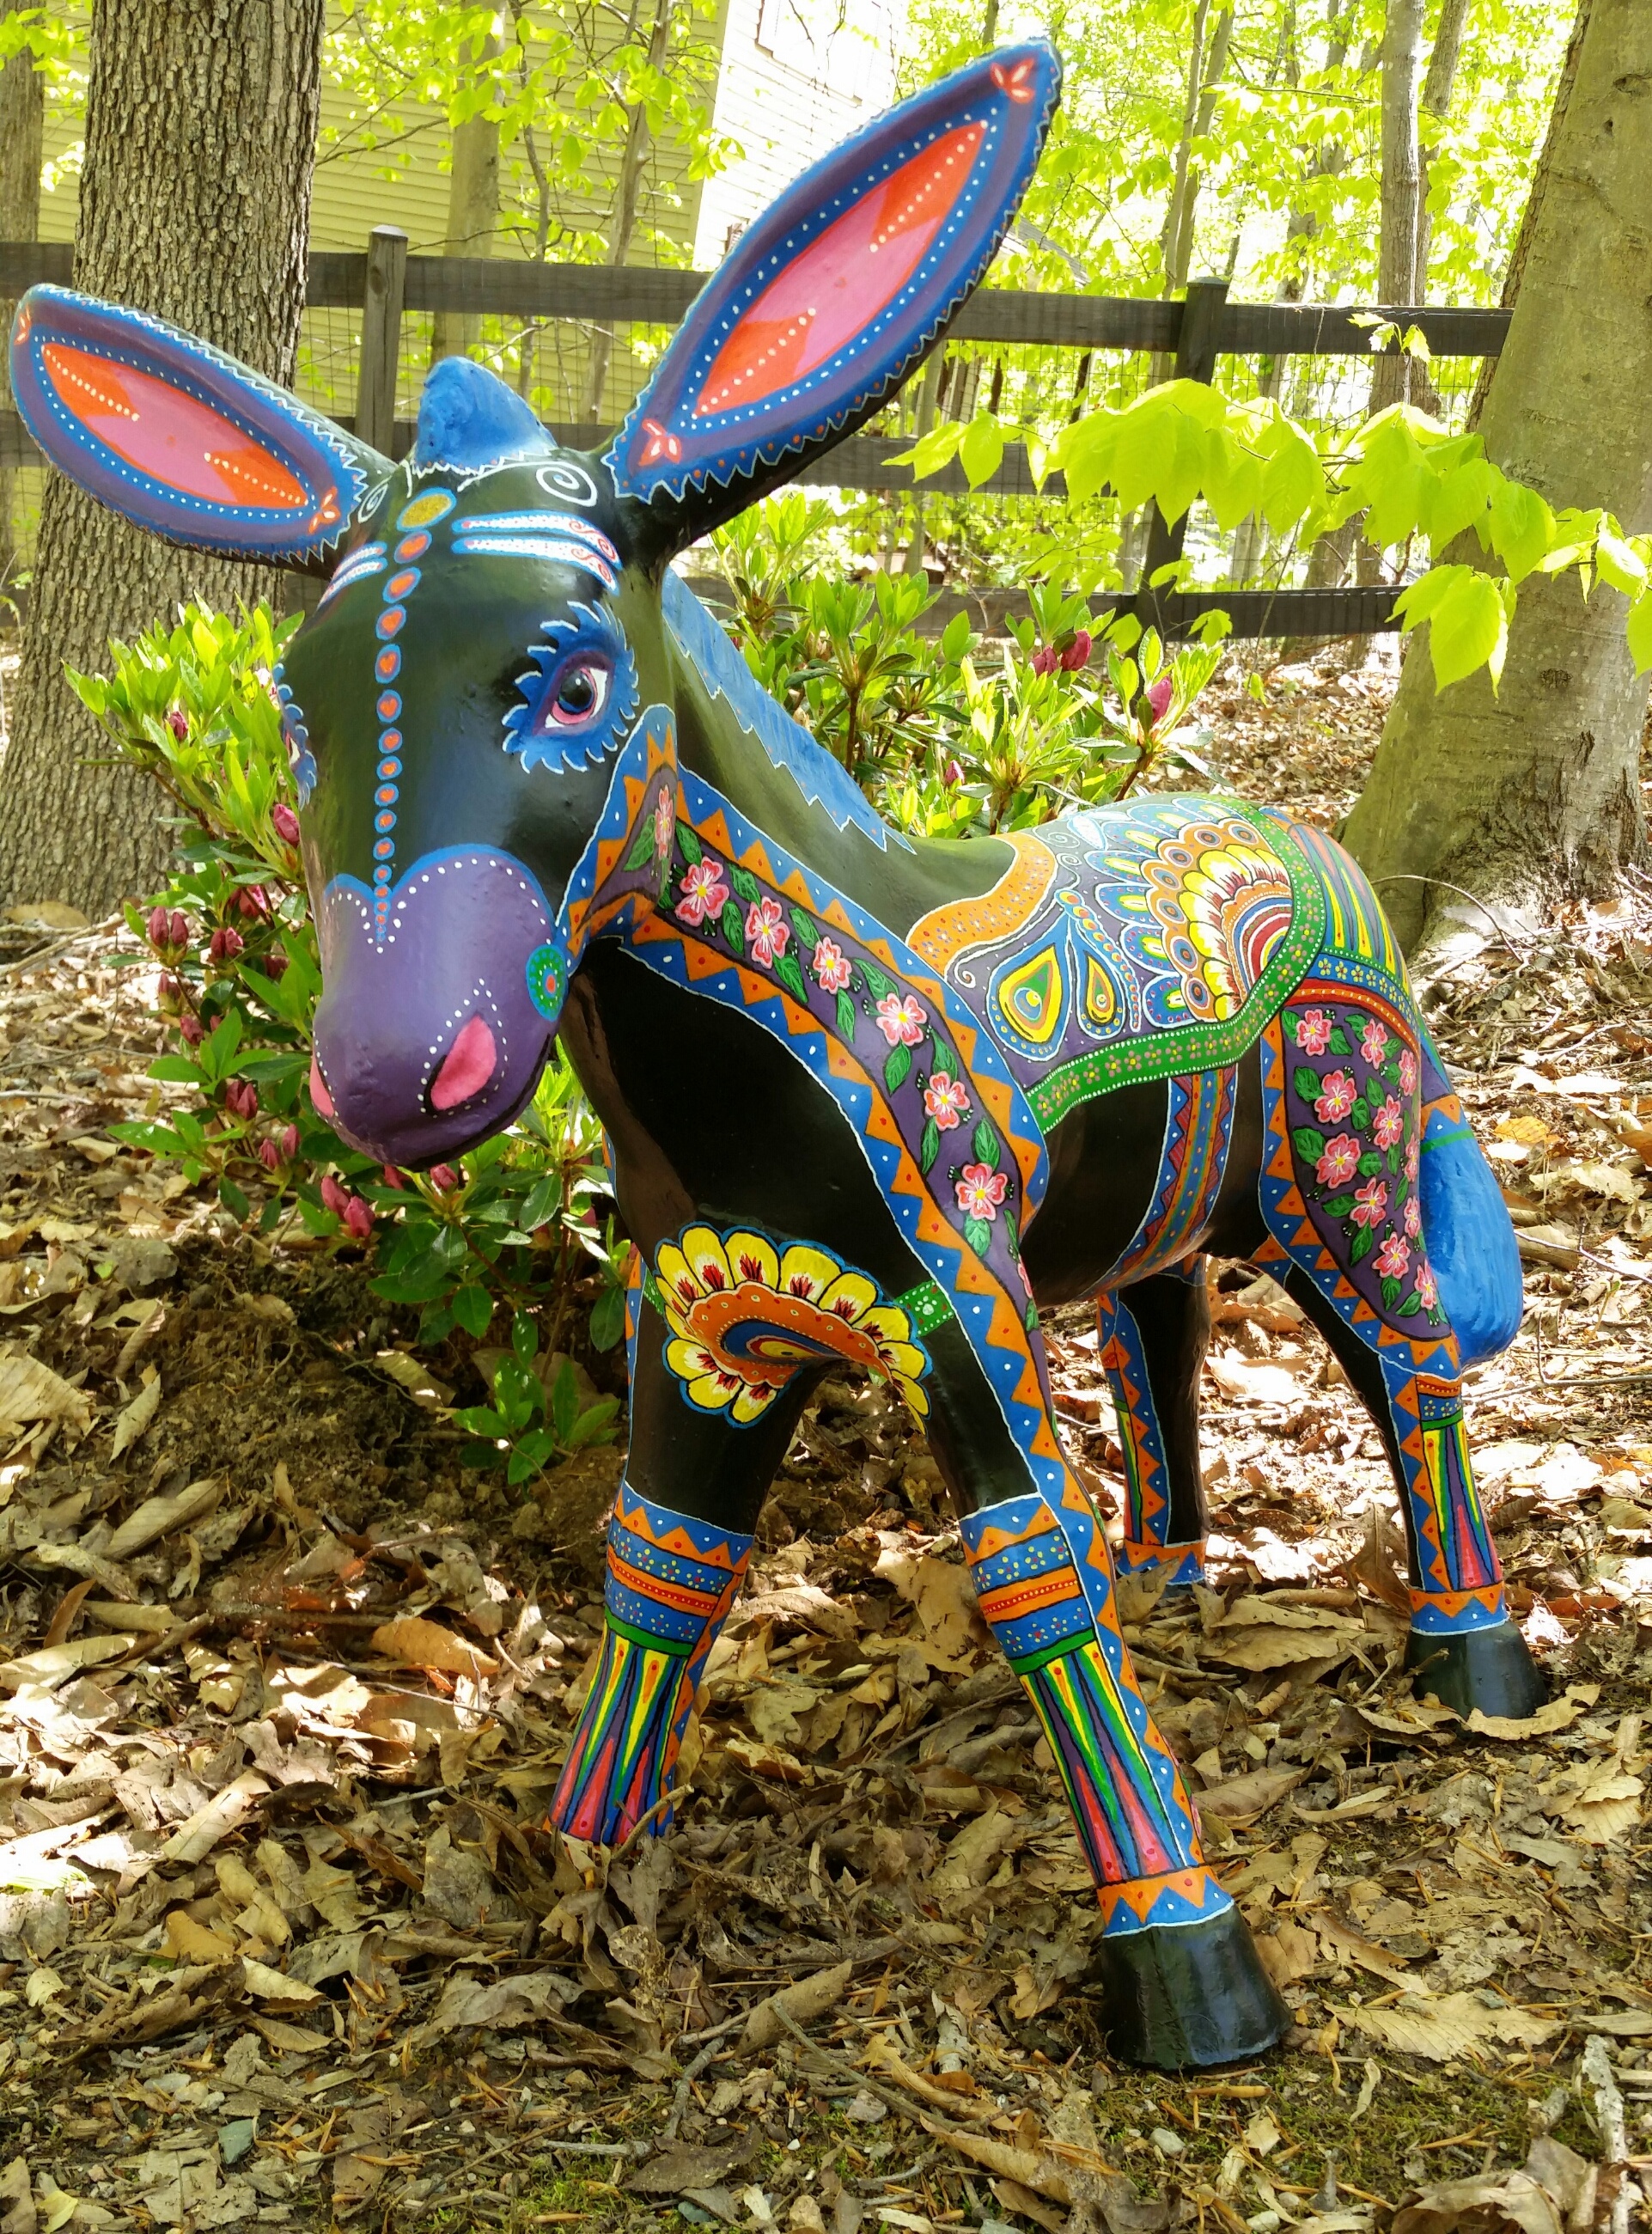 Wonky Donkey is up for  bid through an auction with Green Dogs Unleashed for more info go to the Home page.